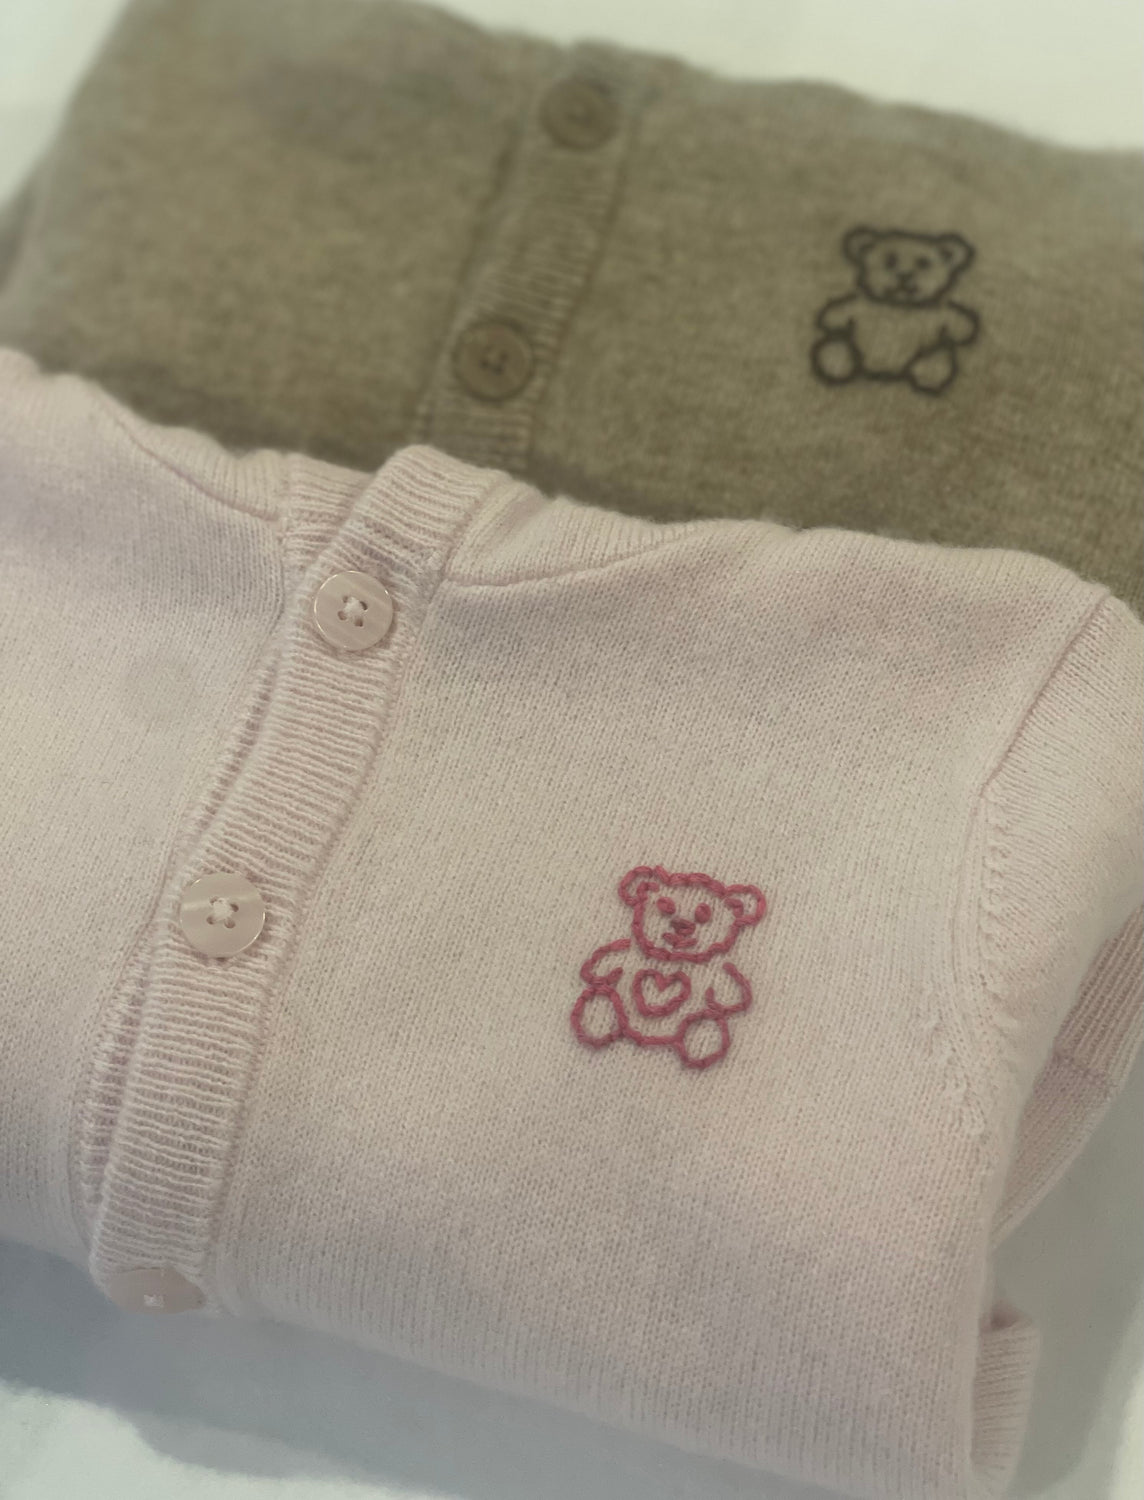 Le Fasheri Pink Cashmere Hand Embroidered Baby Bear Hooded Sweatshirt